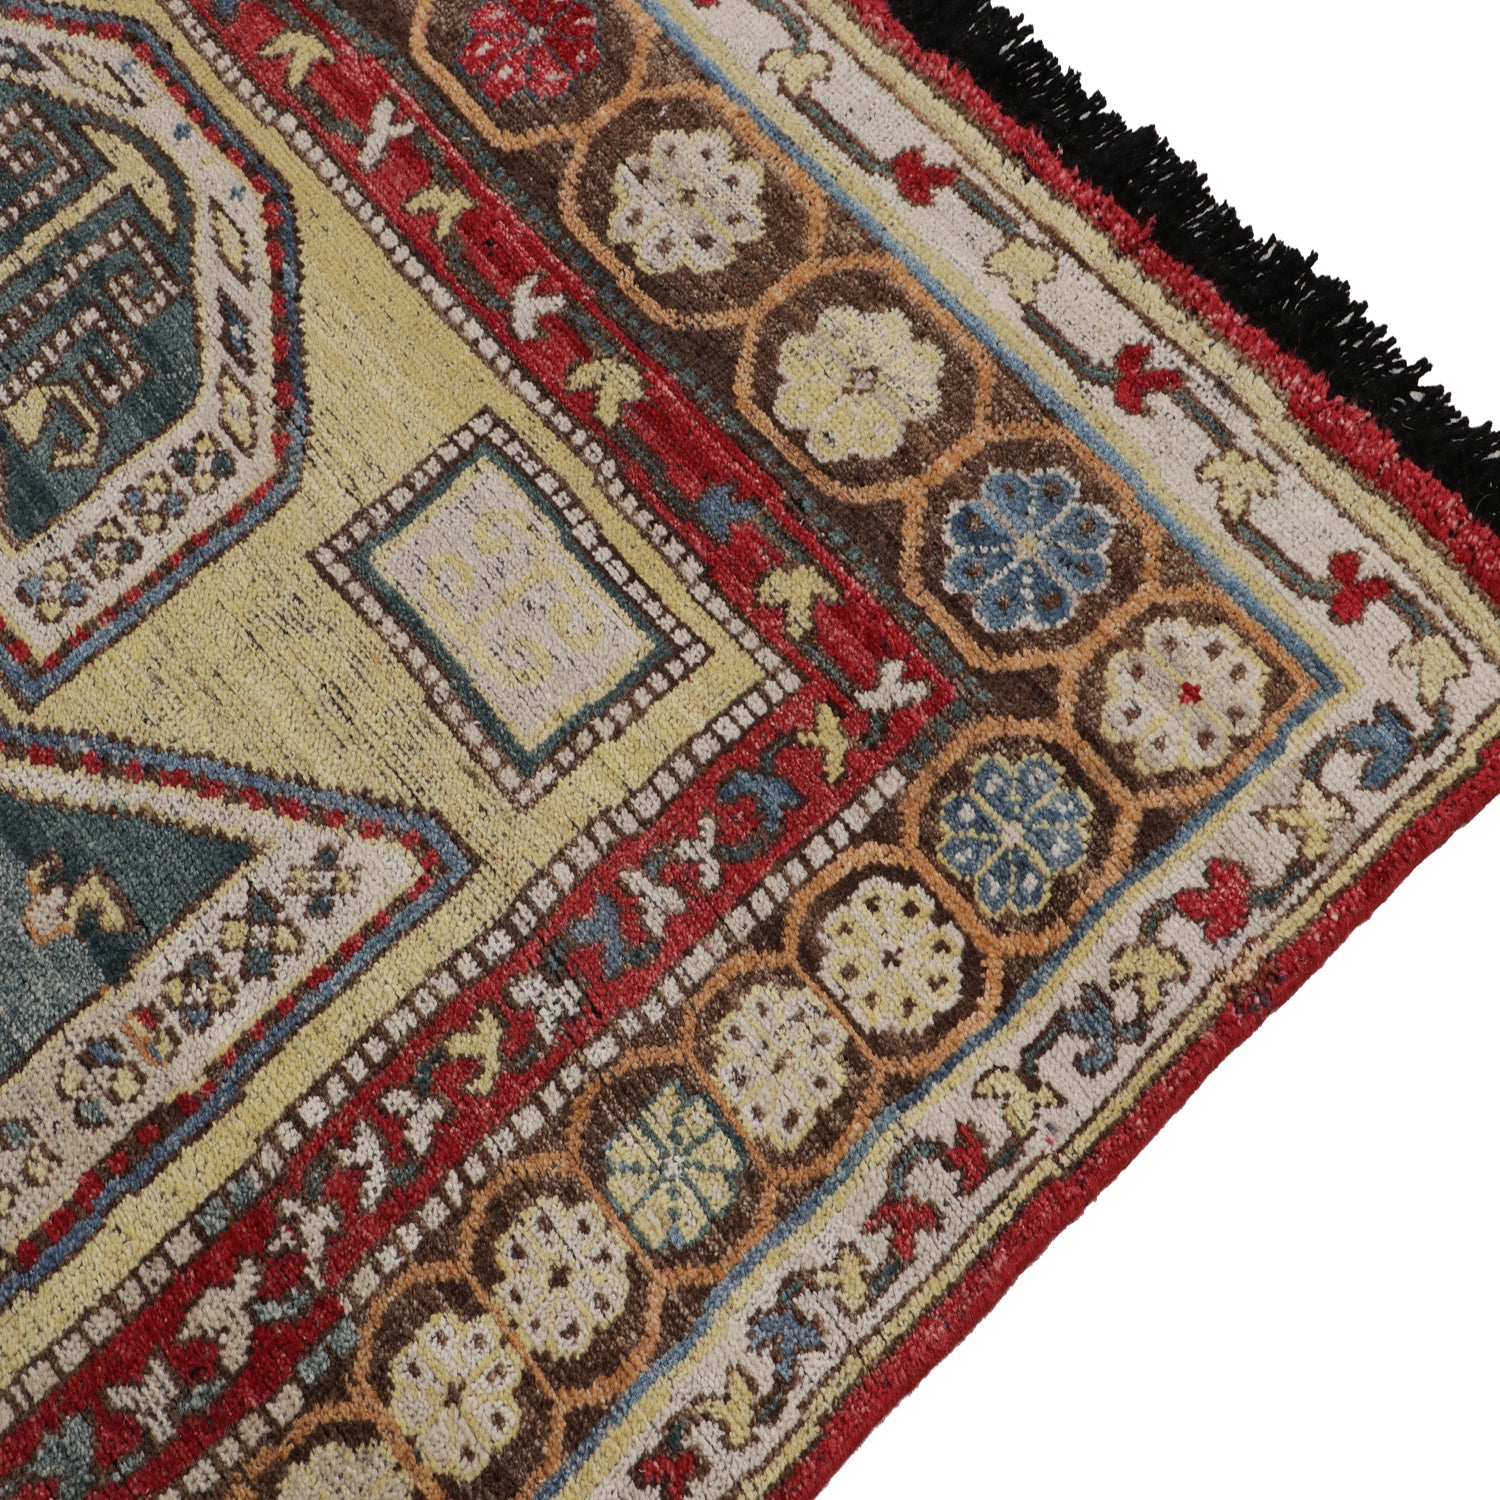 Ornately patterned rug showcasing complex geometric and floral motifs.